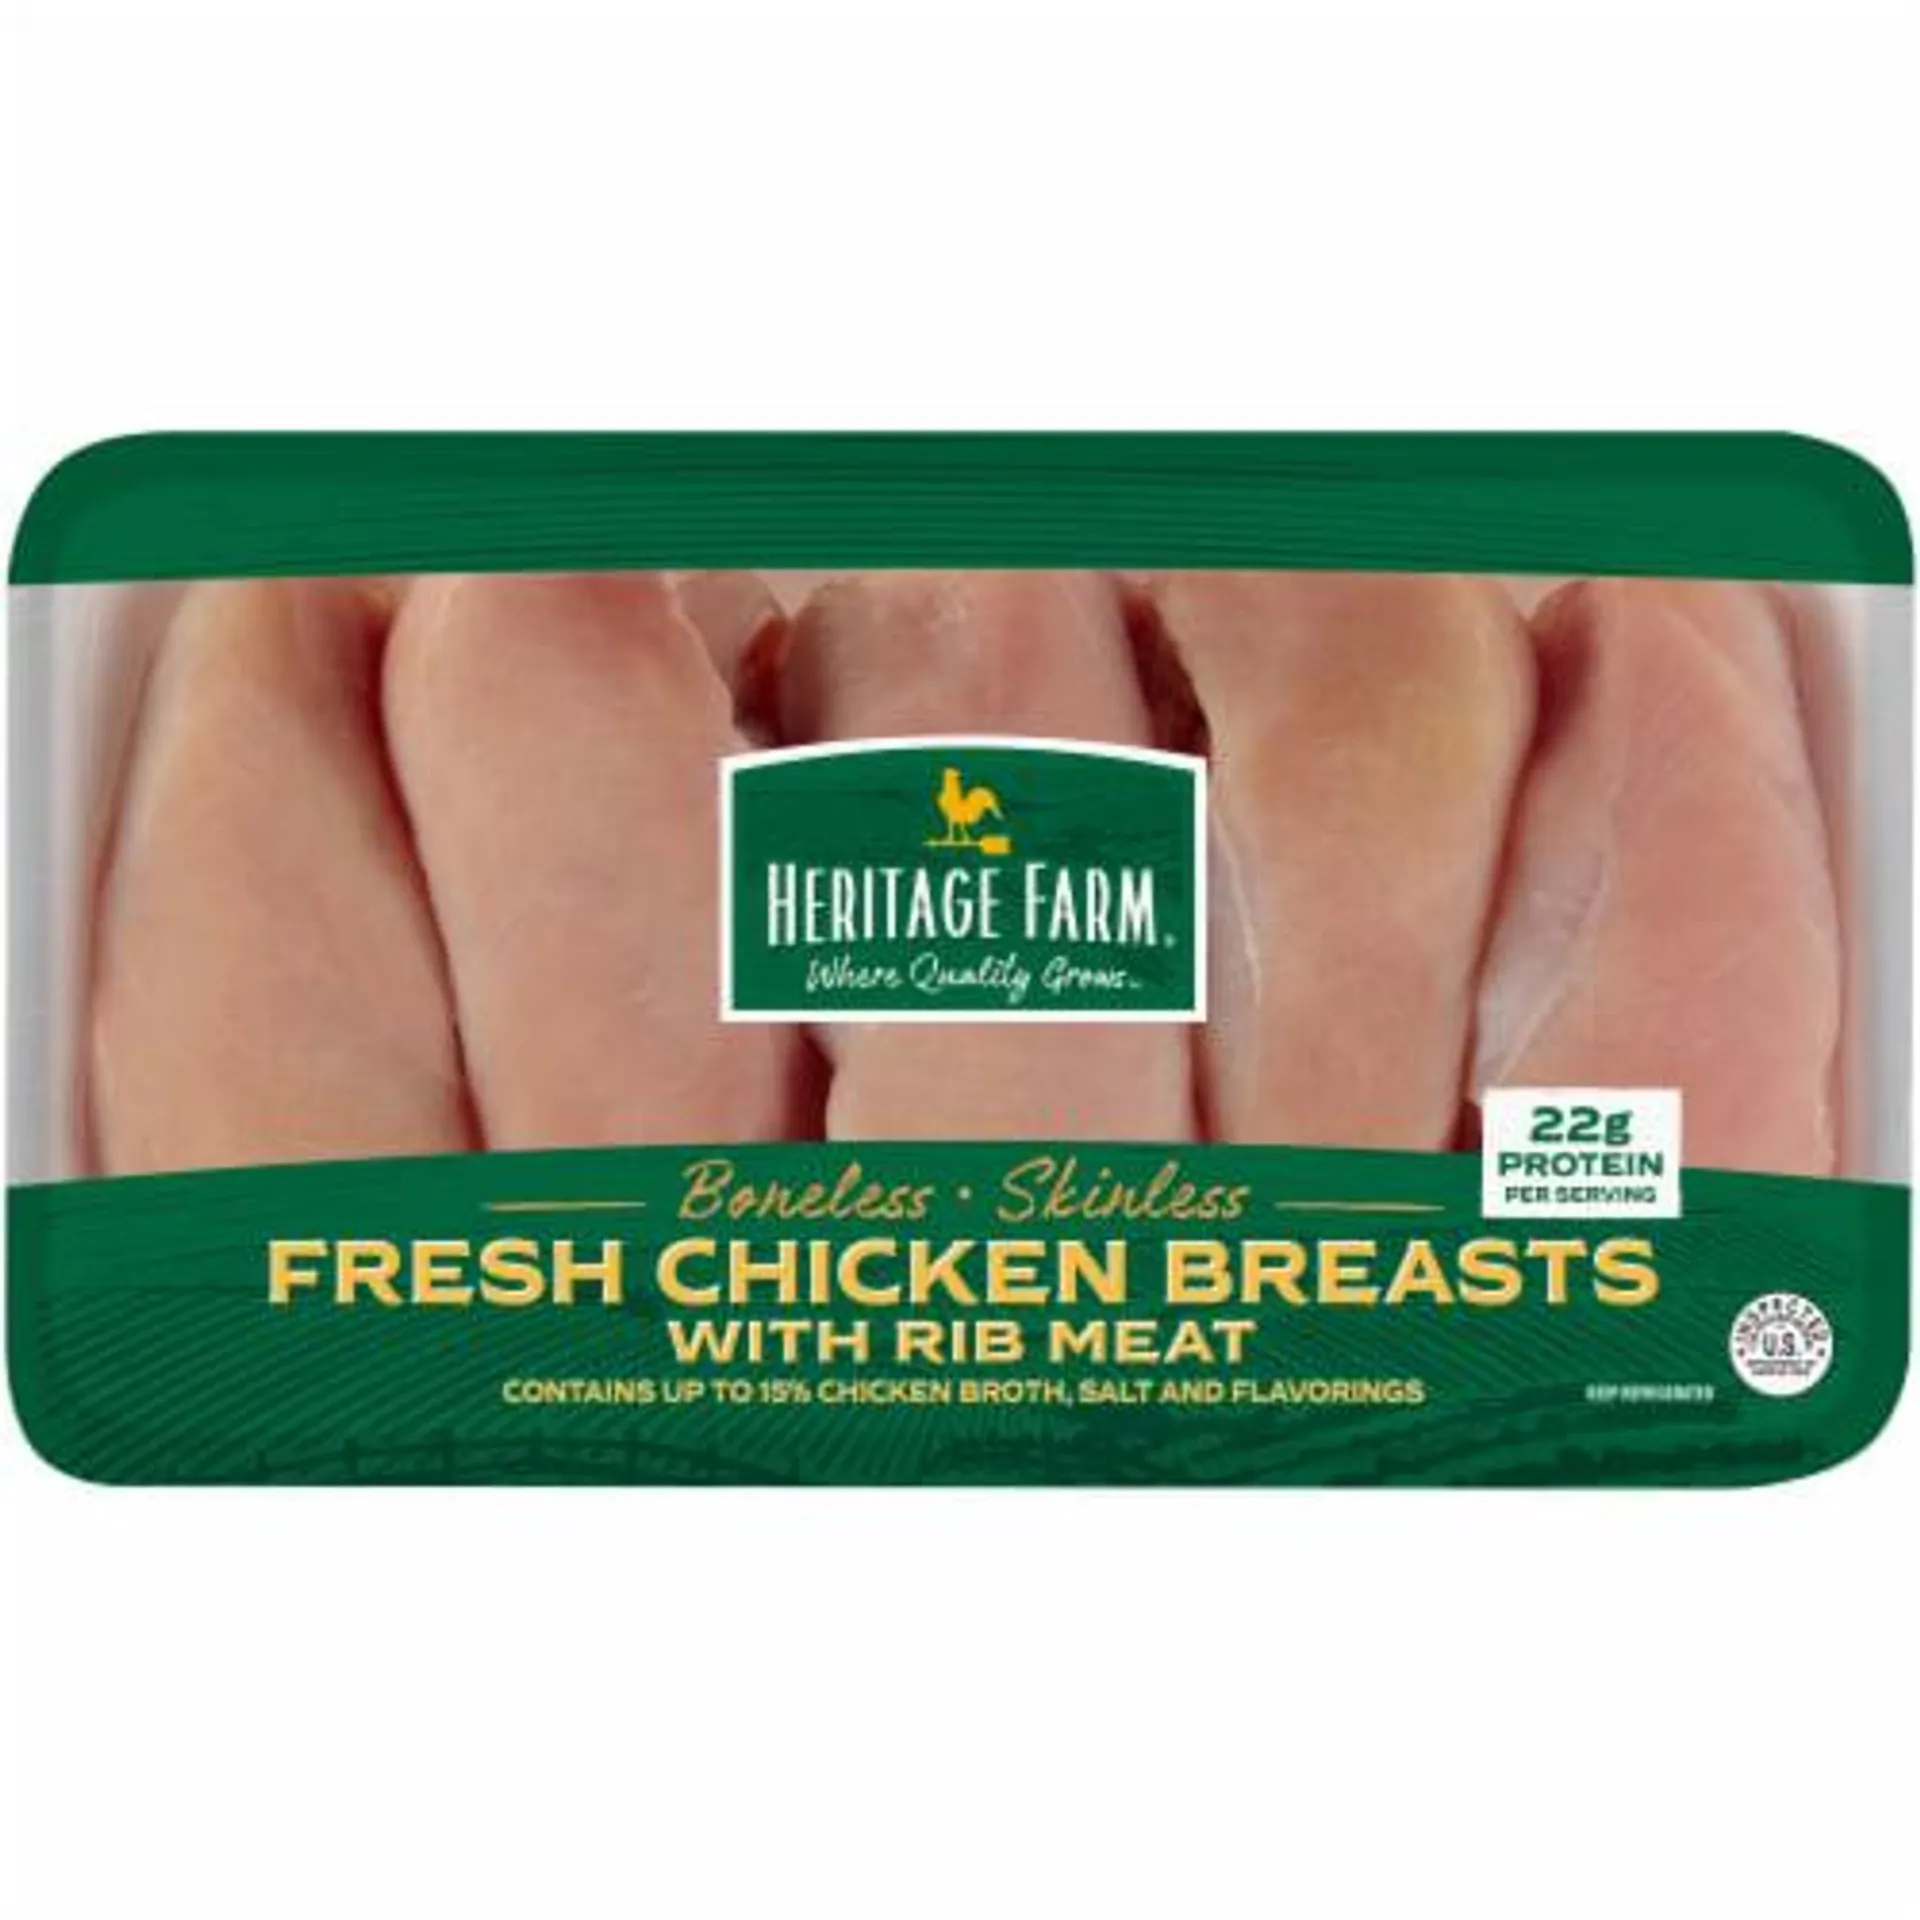 Heritage Farm® Boneless & Skinless Chicken Breasts with Rib Meat